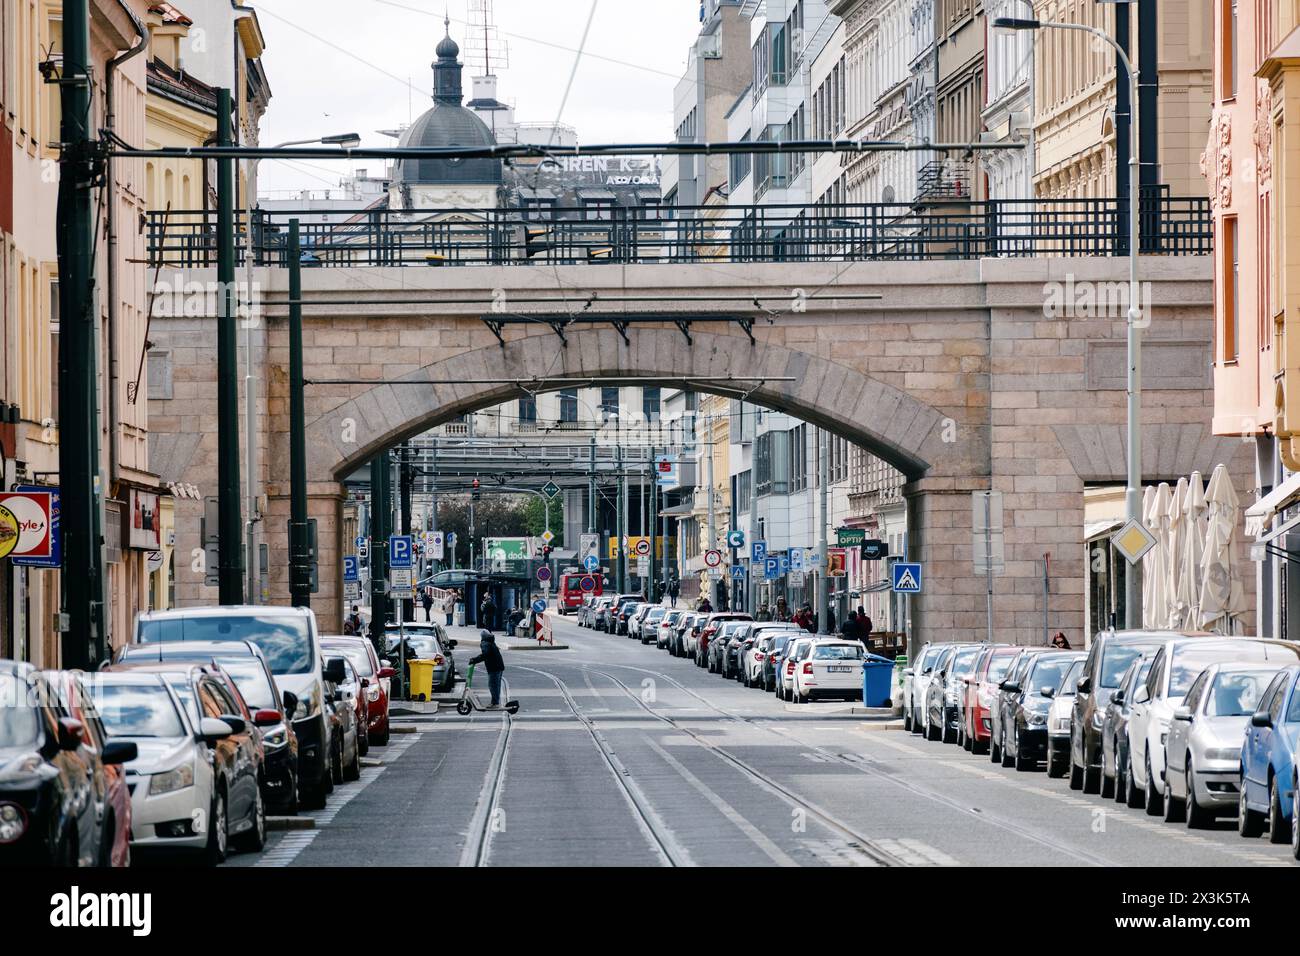 Sokolovska Street in Prague with its iconic arch bridge and tram lines, bustling with urban life. Stock Photo